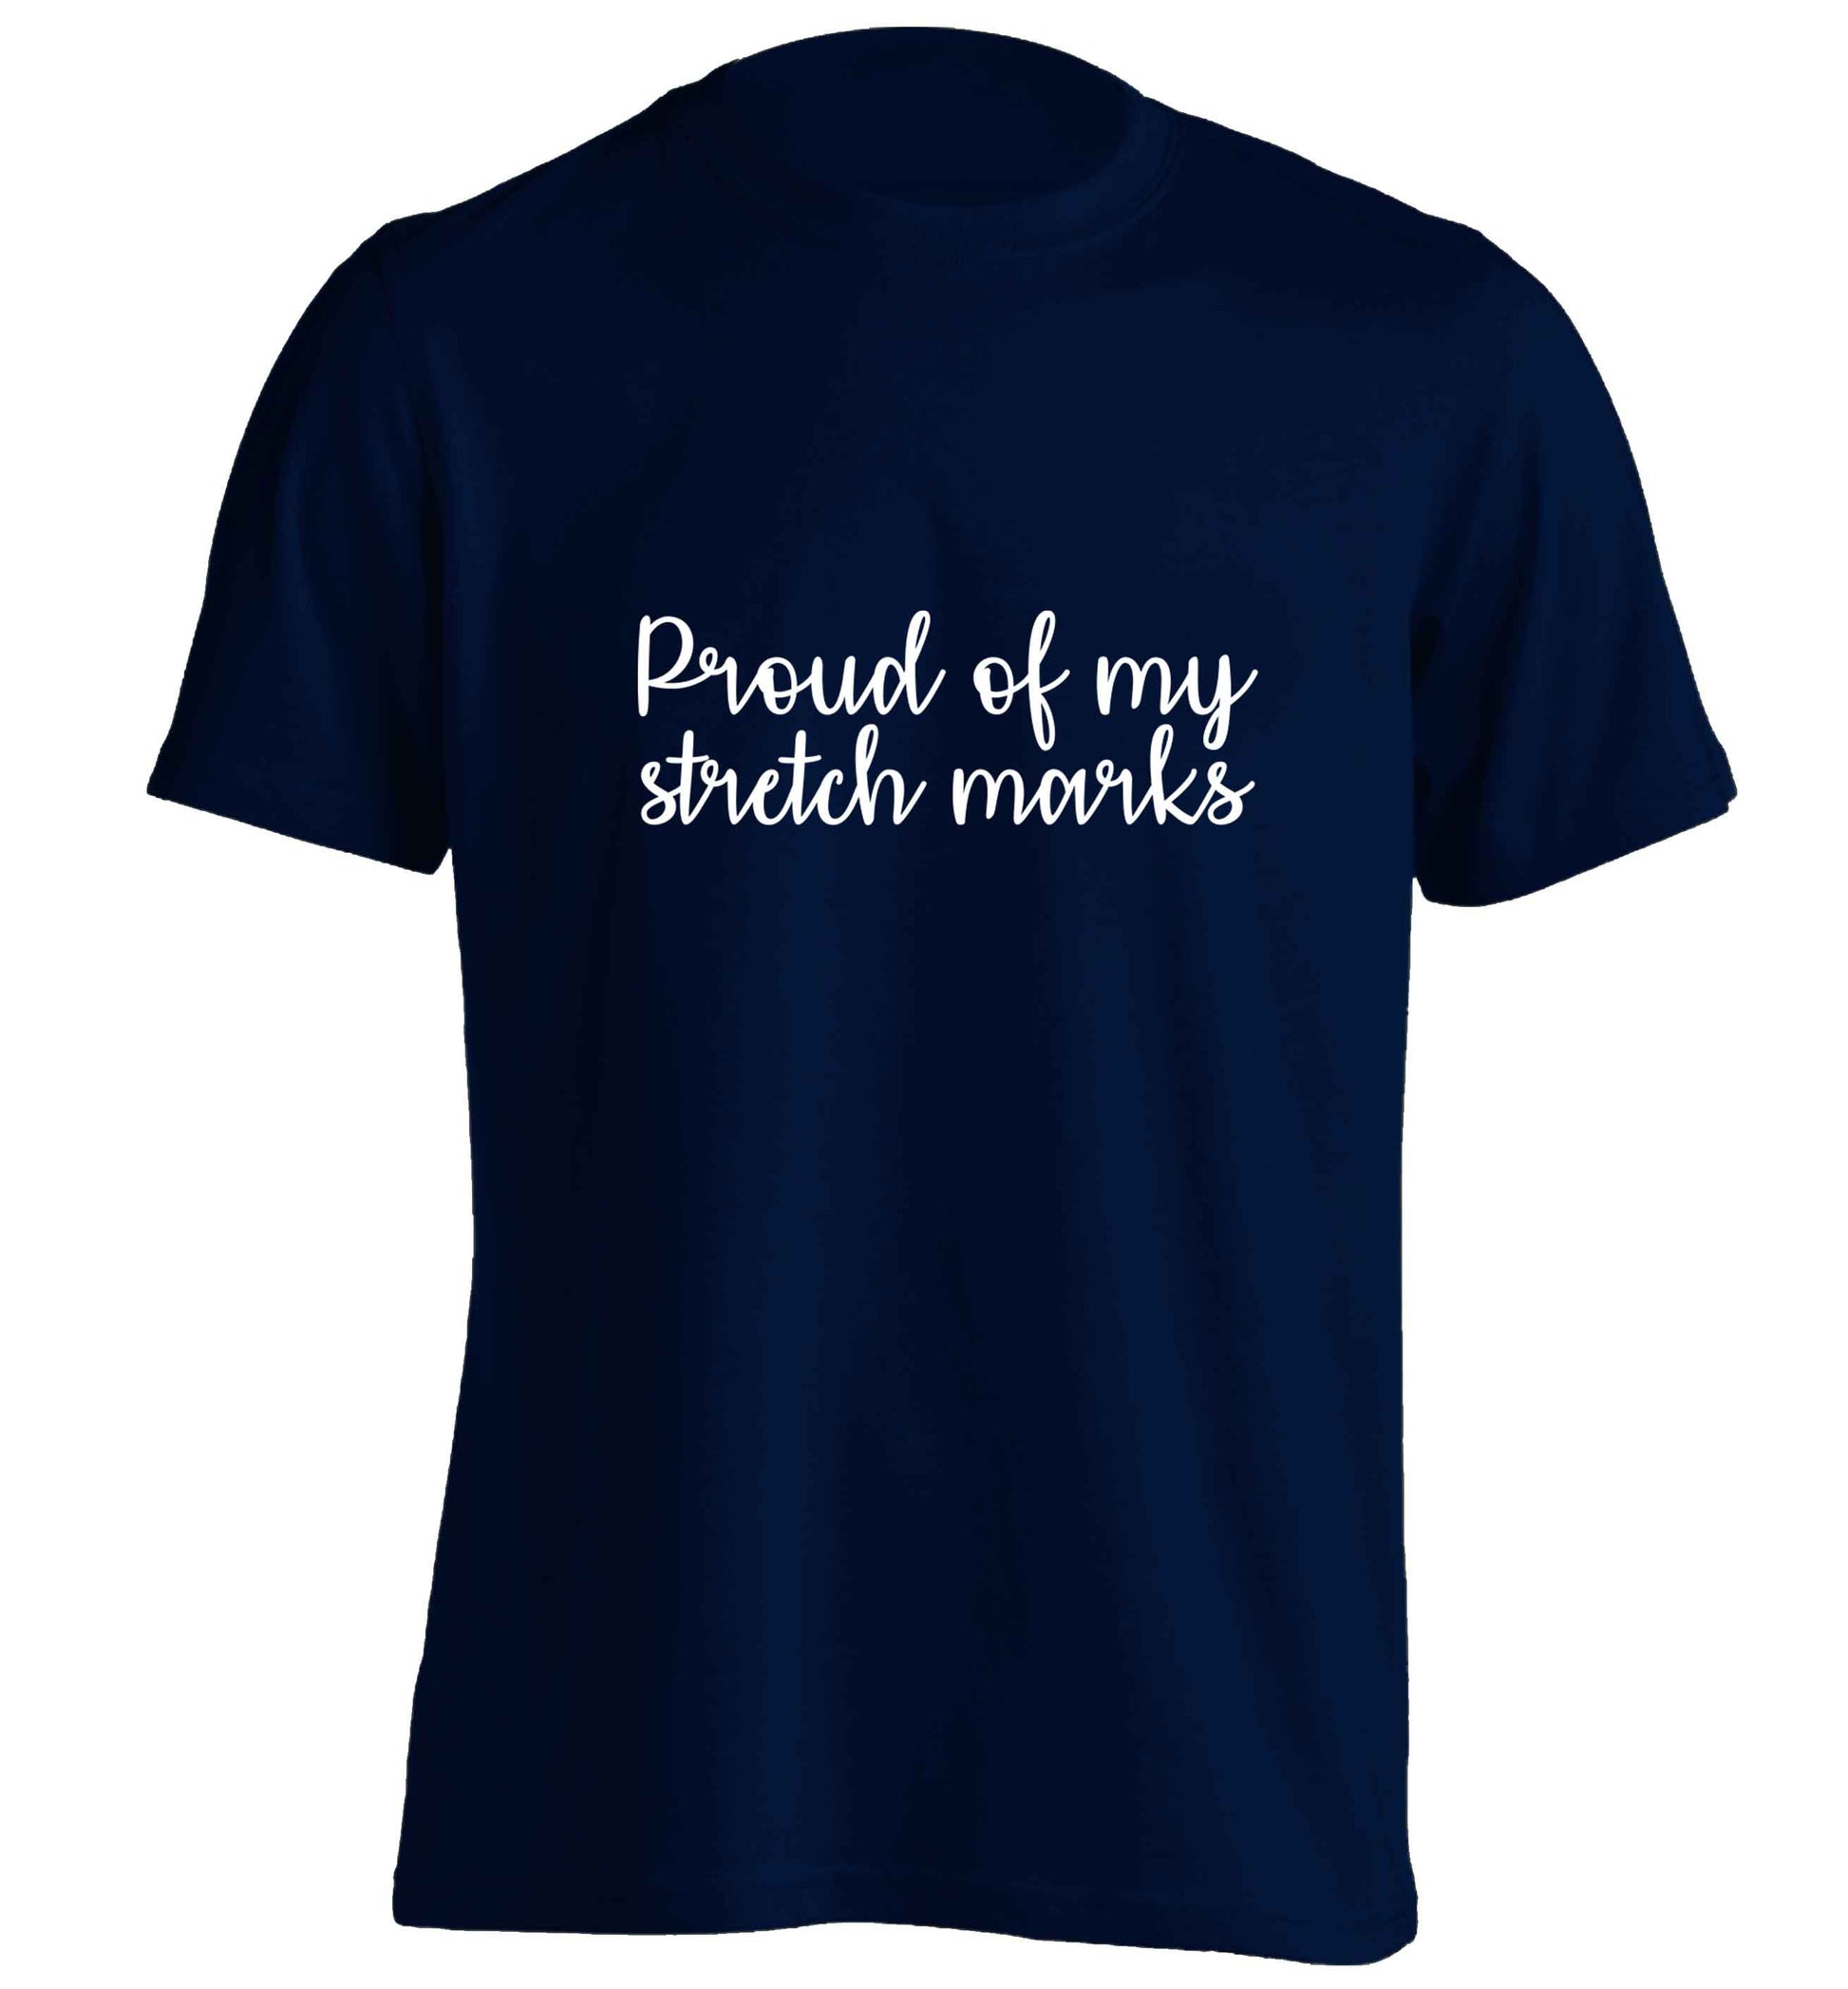 Proud of my stretch marks adults unisex navy Tshirt 2XL